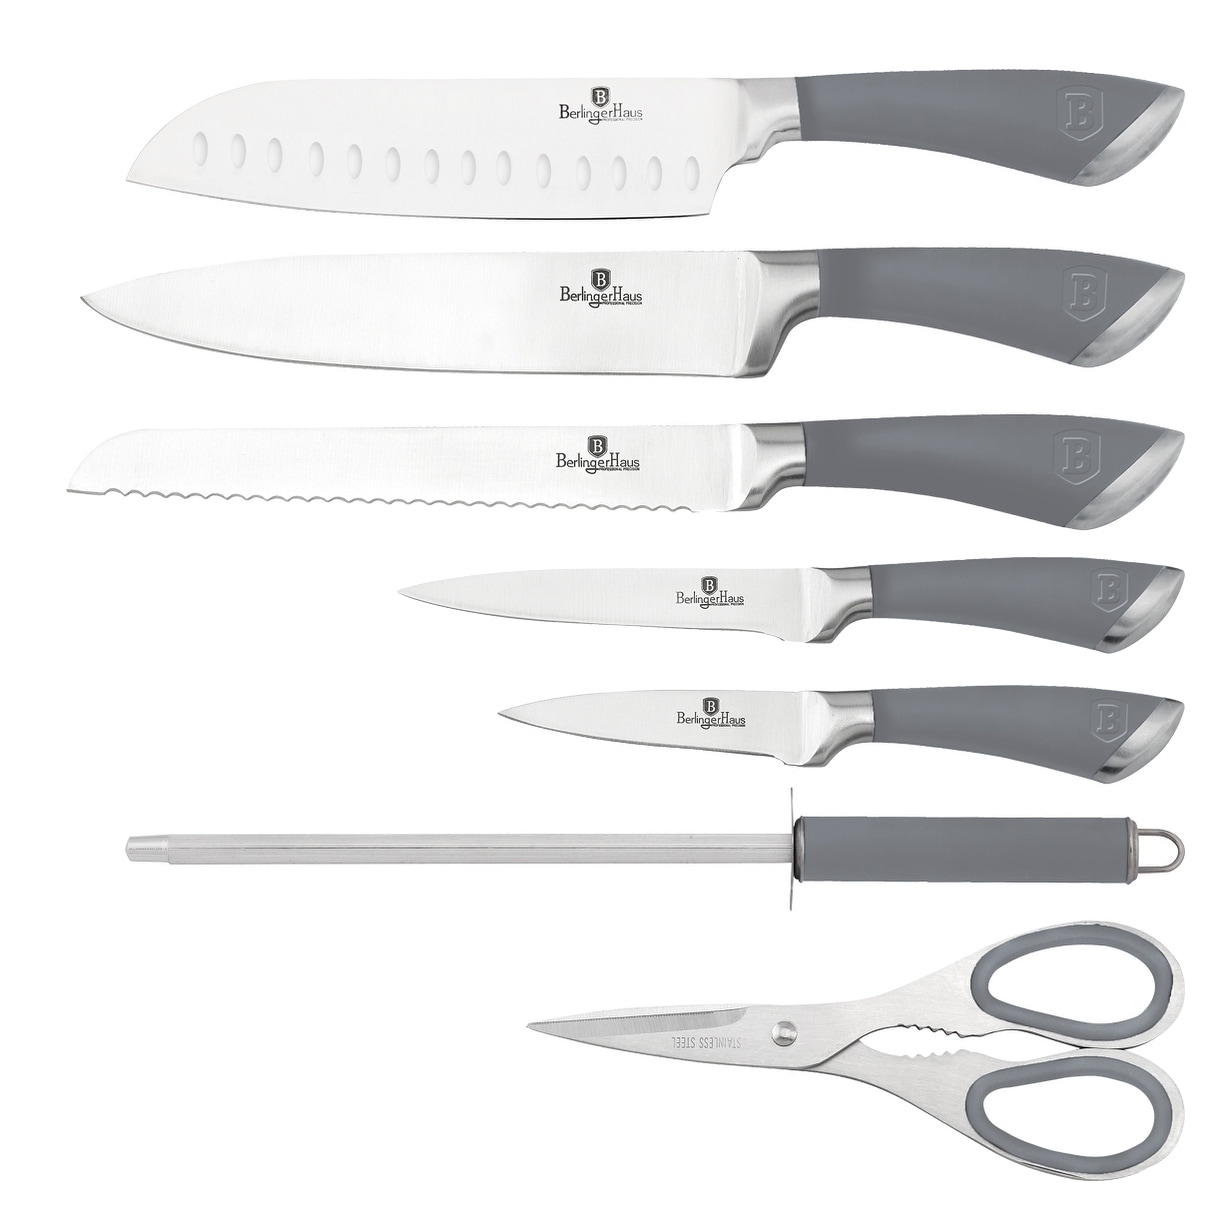 https://ak1.ostkcdn.com/images/products/is/images/direct/2fd0efbbfa4ae99365dabc5e5fc2917fe6a494c0/Berlinger-Haus-8-Piece-Knife-Set-w--Acrylic-Stand-Carbon.jpg